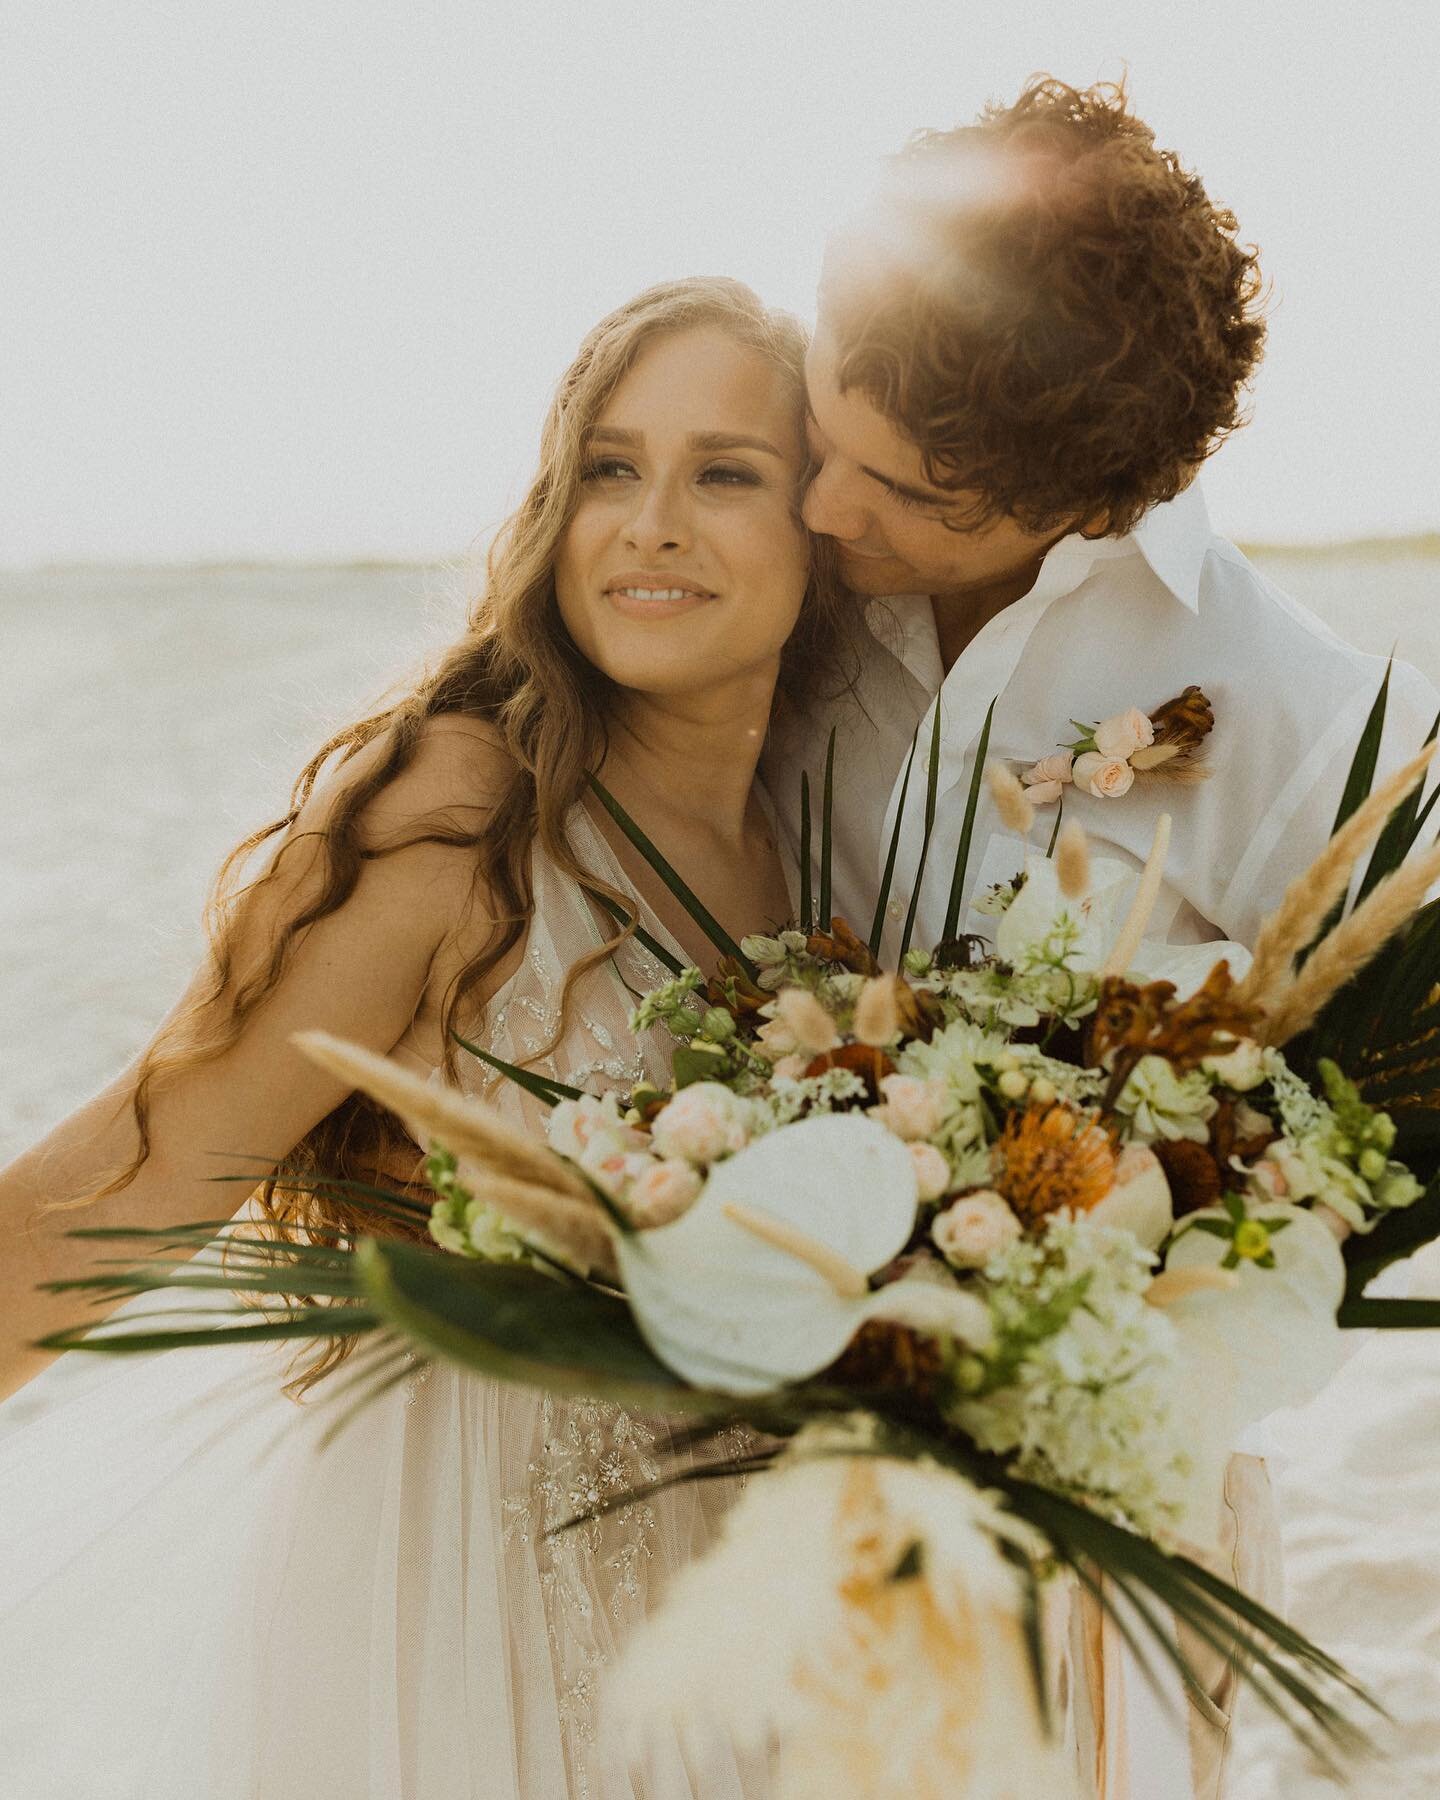 This shoot was too good not to post back to back, just look at those dreamy tones 🌞
⠀⠀⠀⠀⠀⠀⠀⠀⠀
⠀⠀⠀⠀⠀⠀⠀⠀⠀
⠀⠀⠀⠀⠀⠀⠀⠀⠀
Planning + styling @togatheringrace_ 
Planning @pacificandpoppyphoto 
Rentals @hemstitch_vintage 
Florals @fleurzoeflorals 
Hair + make